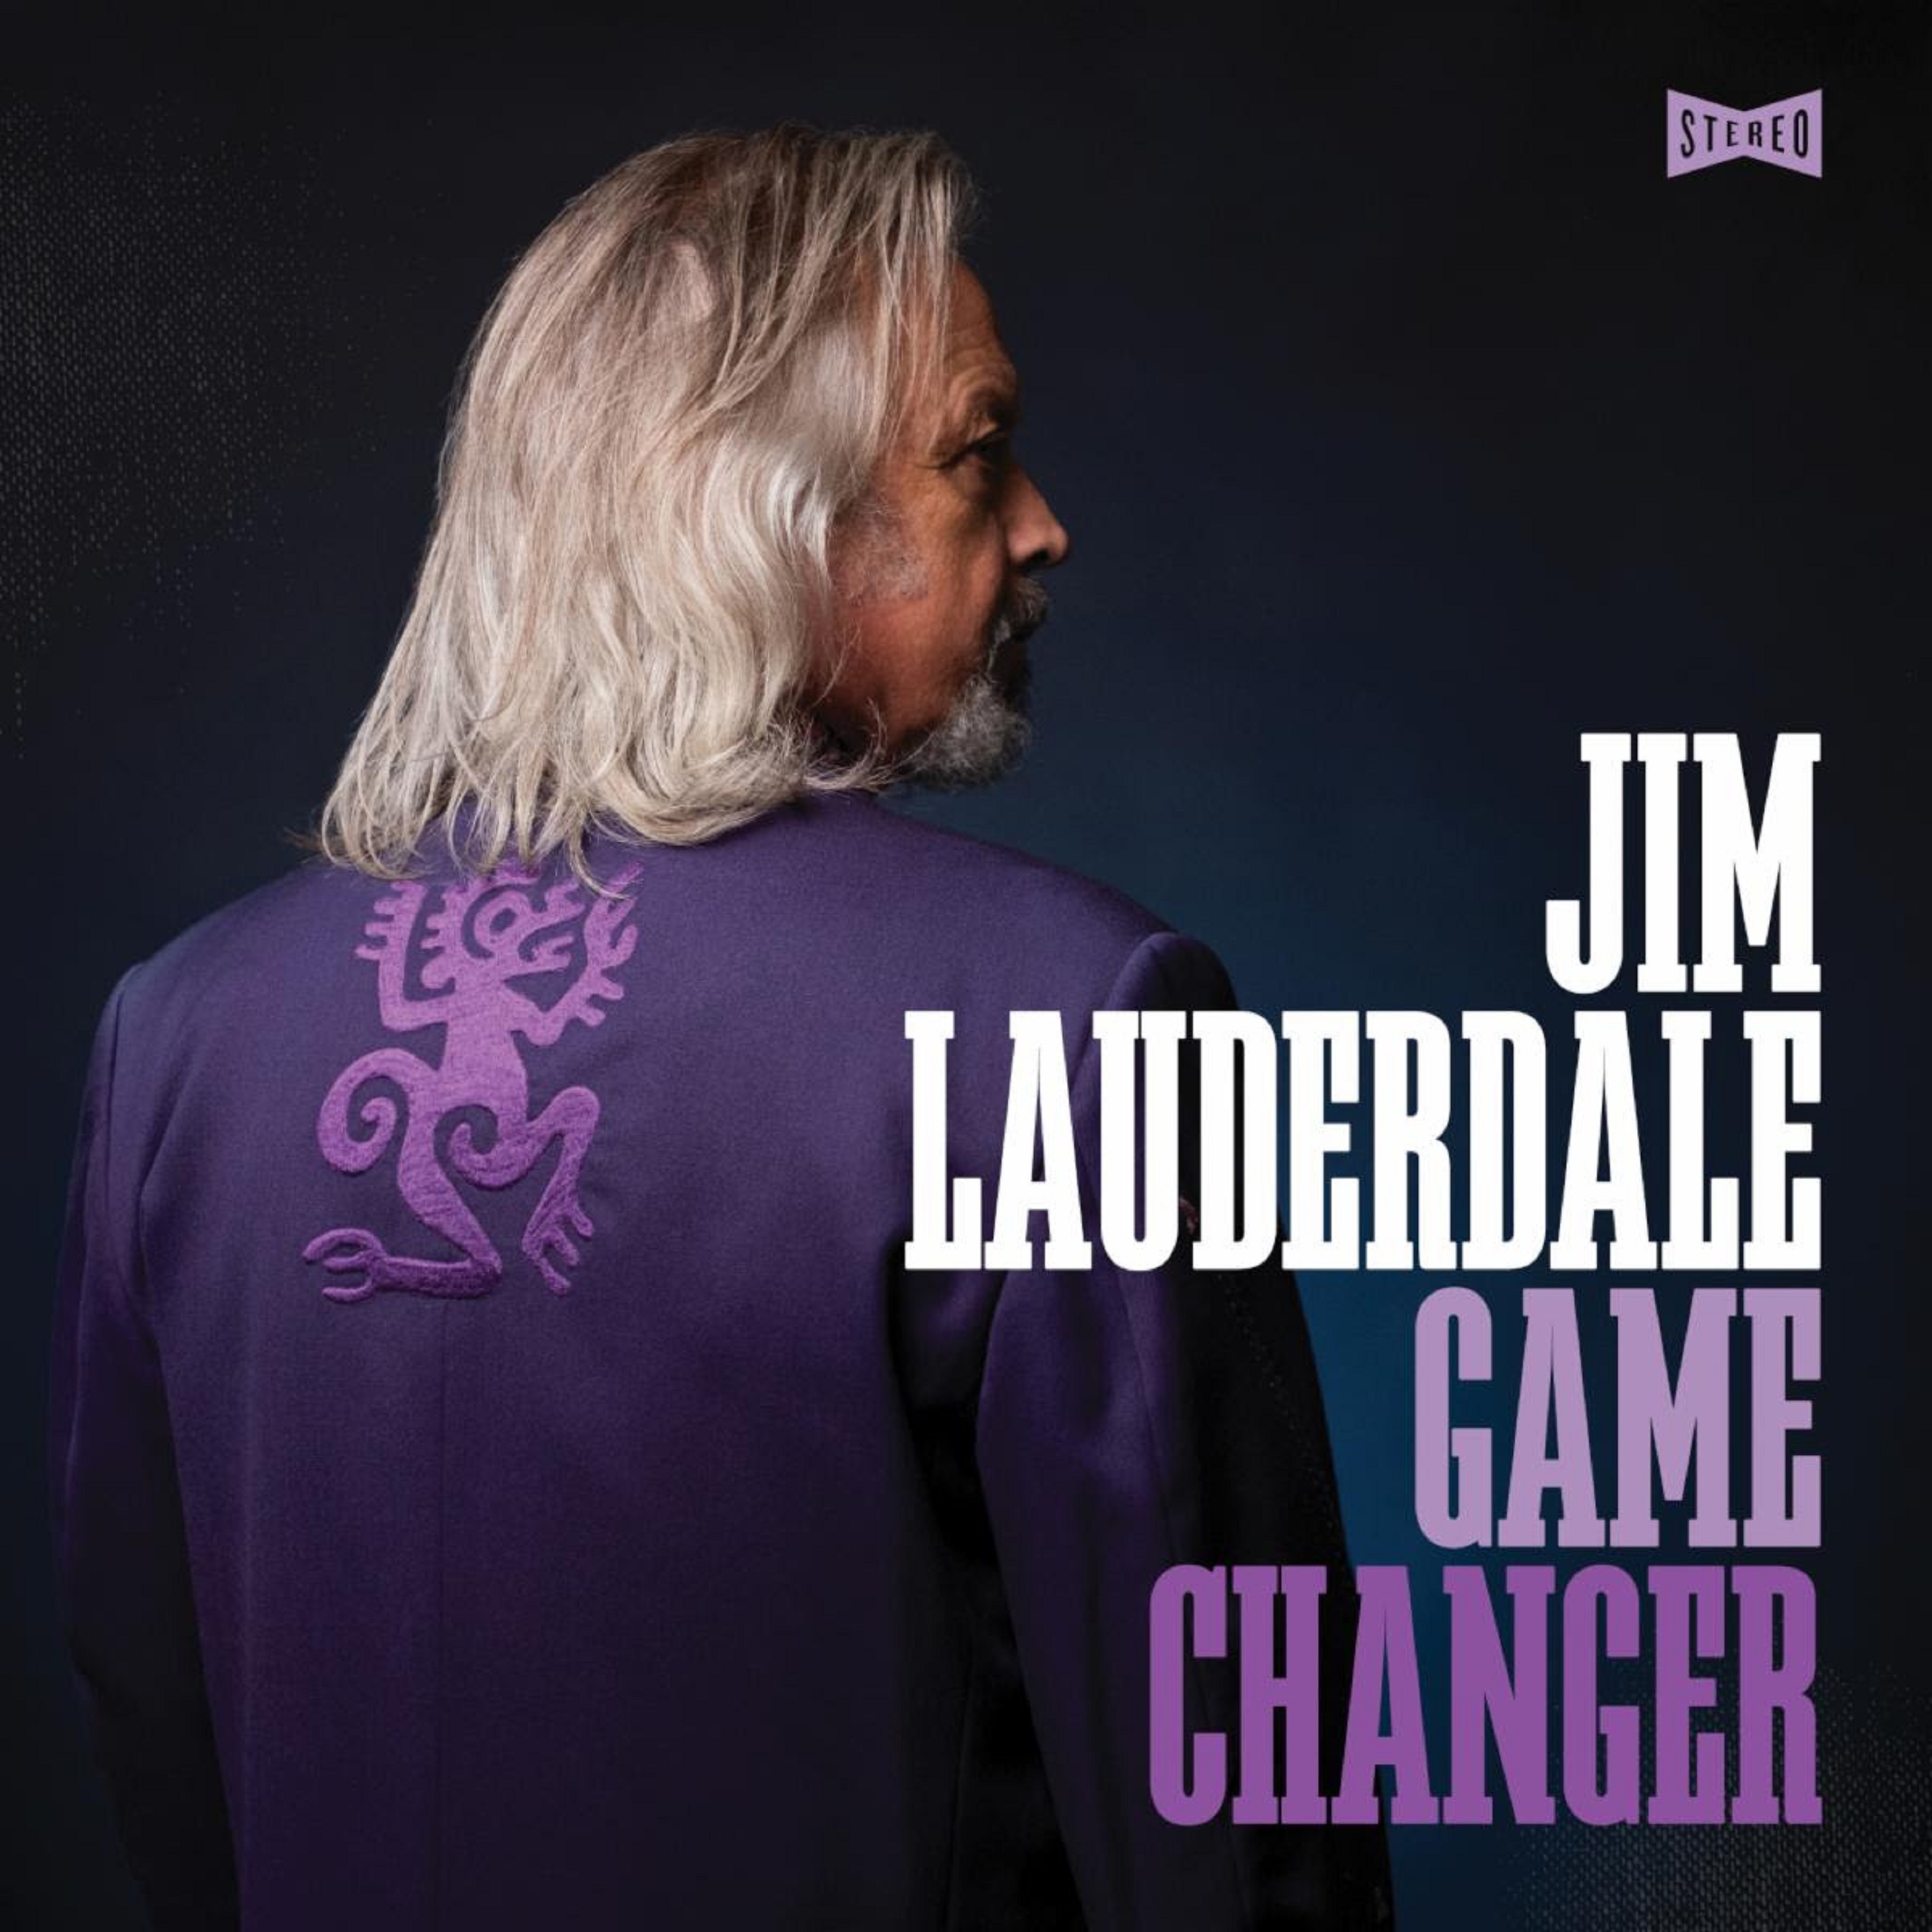 Jim Lauderdale’s Solution Is Resolution On New Single, “Friends Again”